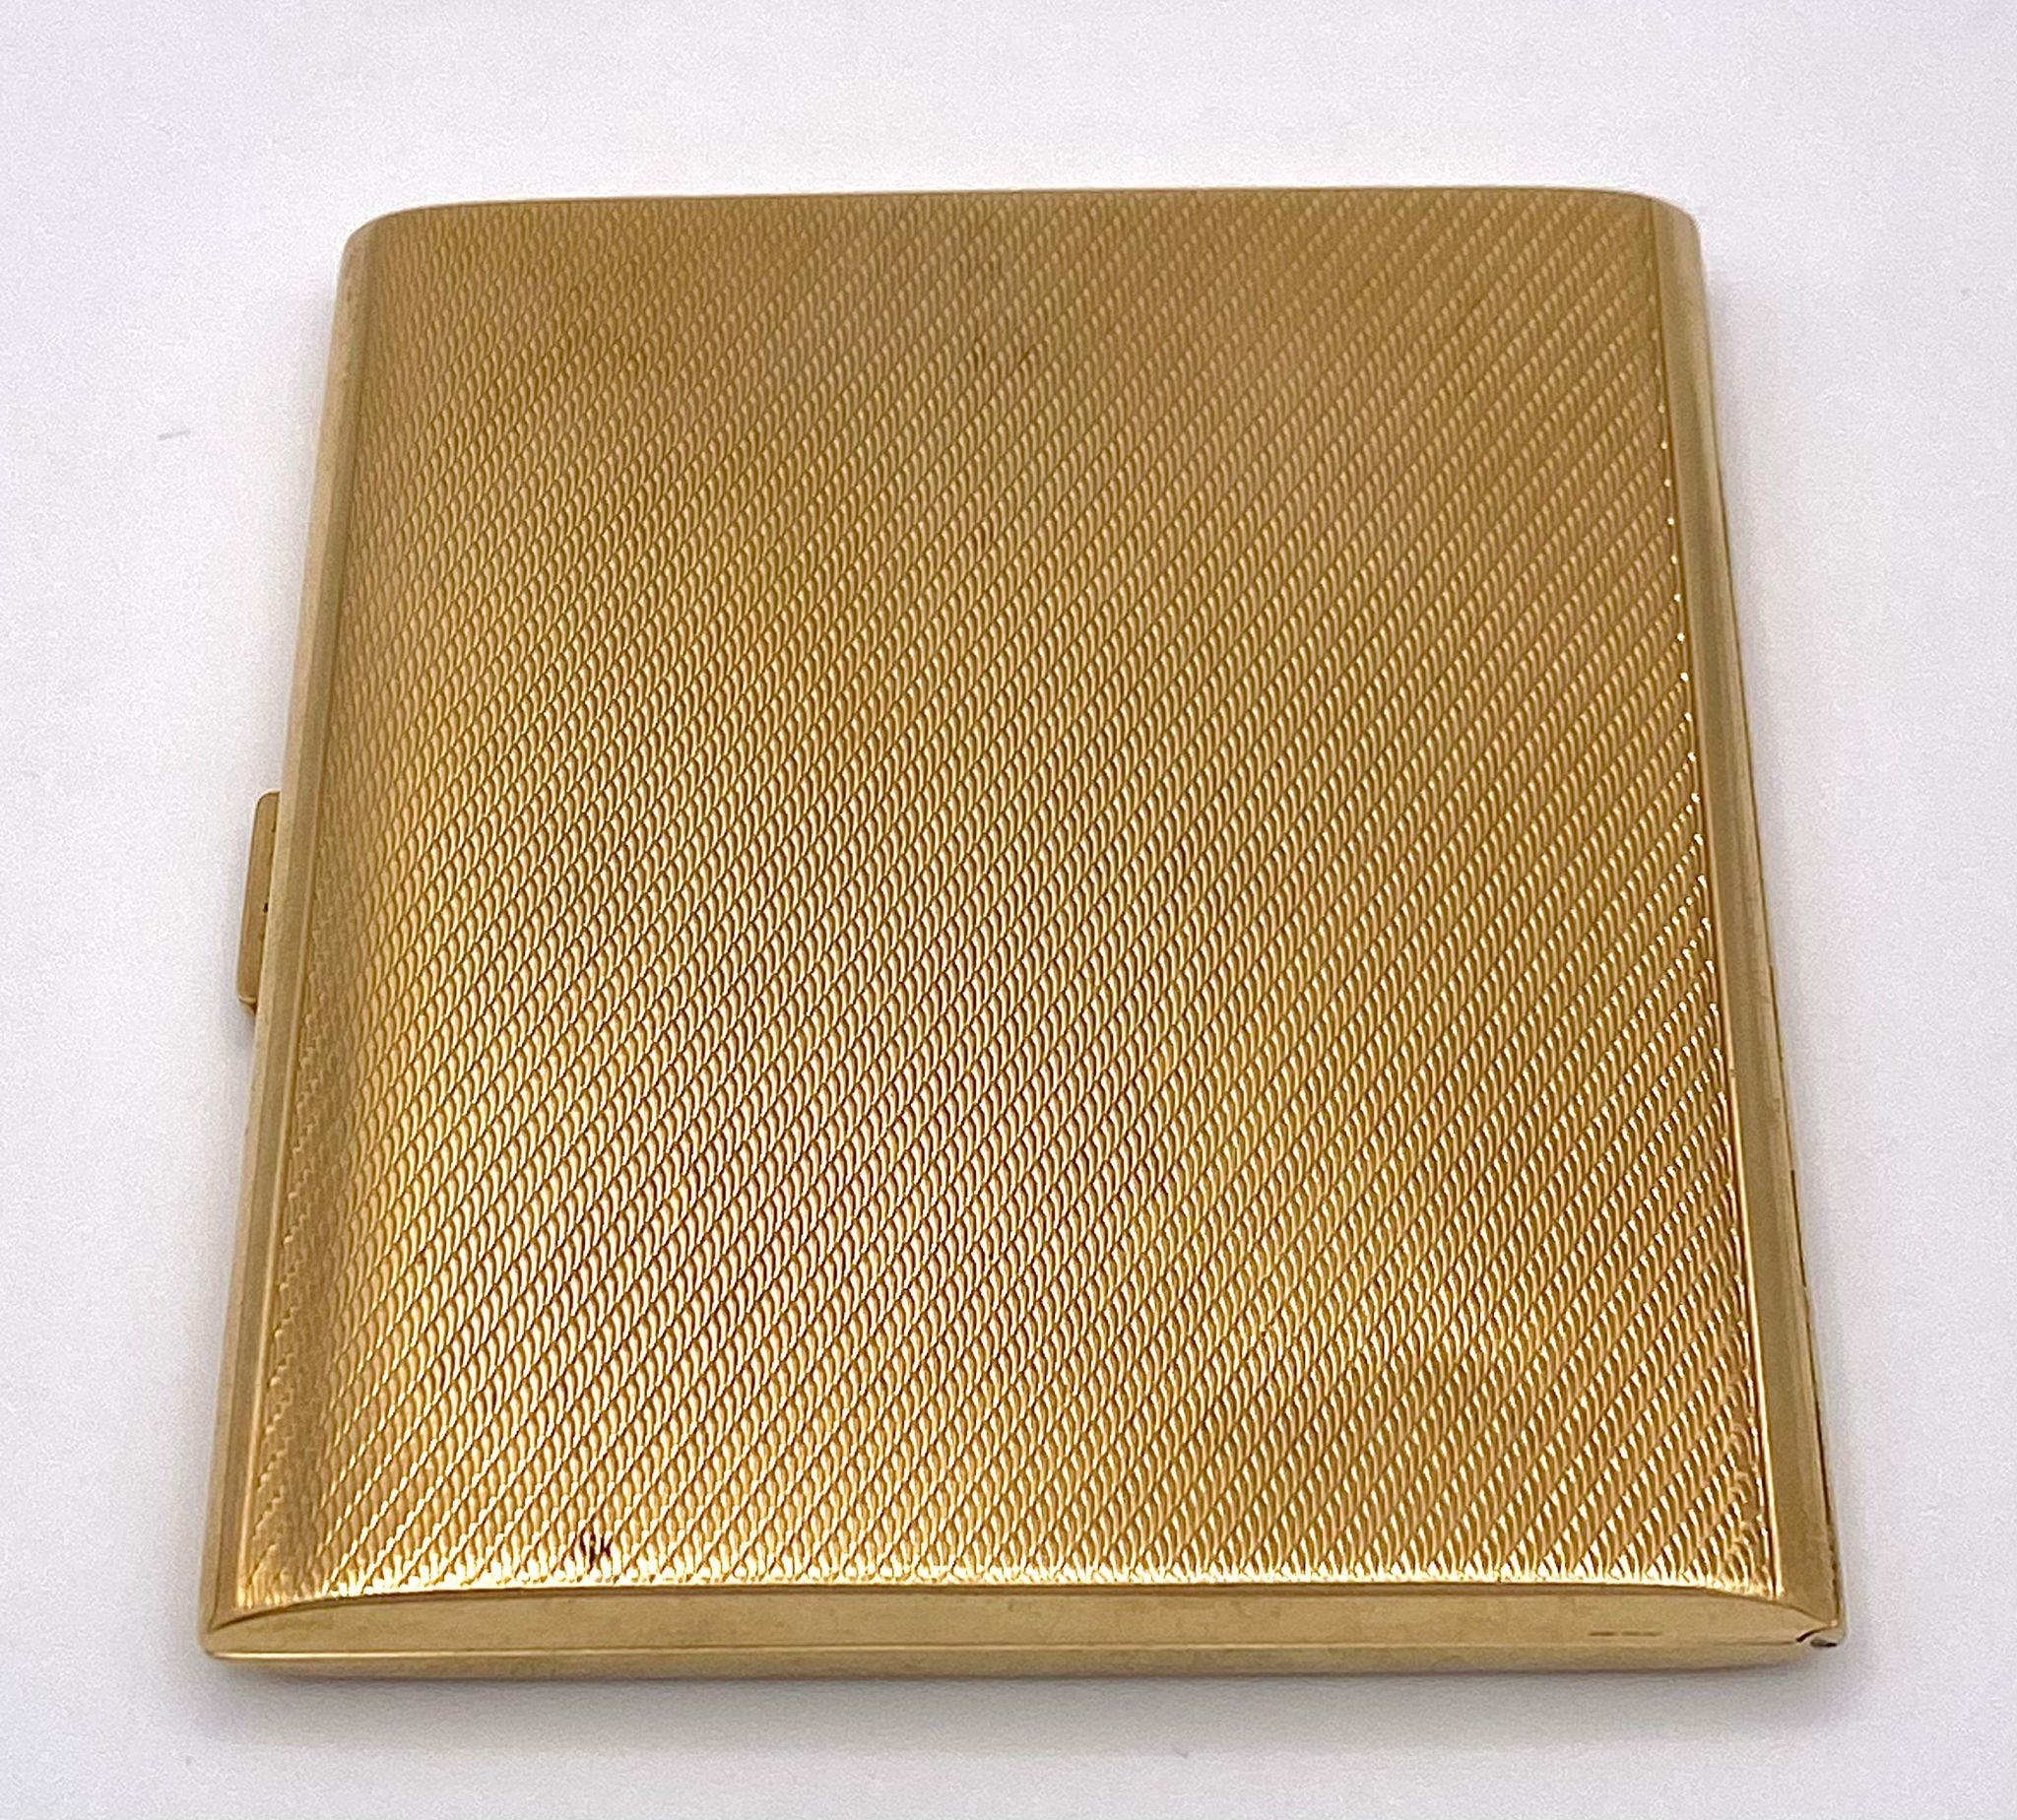 A Vintage 9K Yellow Solid Gold Cigarette Case. 8cm x 7.5cm. 72.9g weight. Full UK hallmarks. - Image 3 of 7